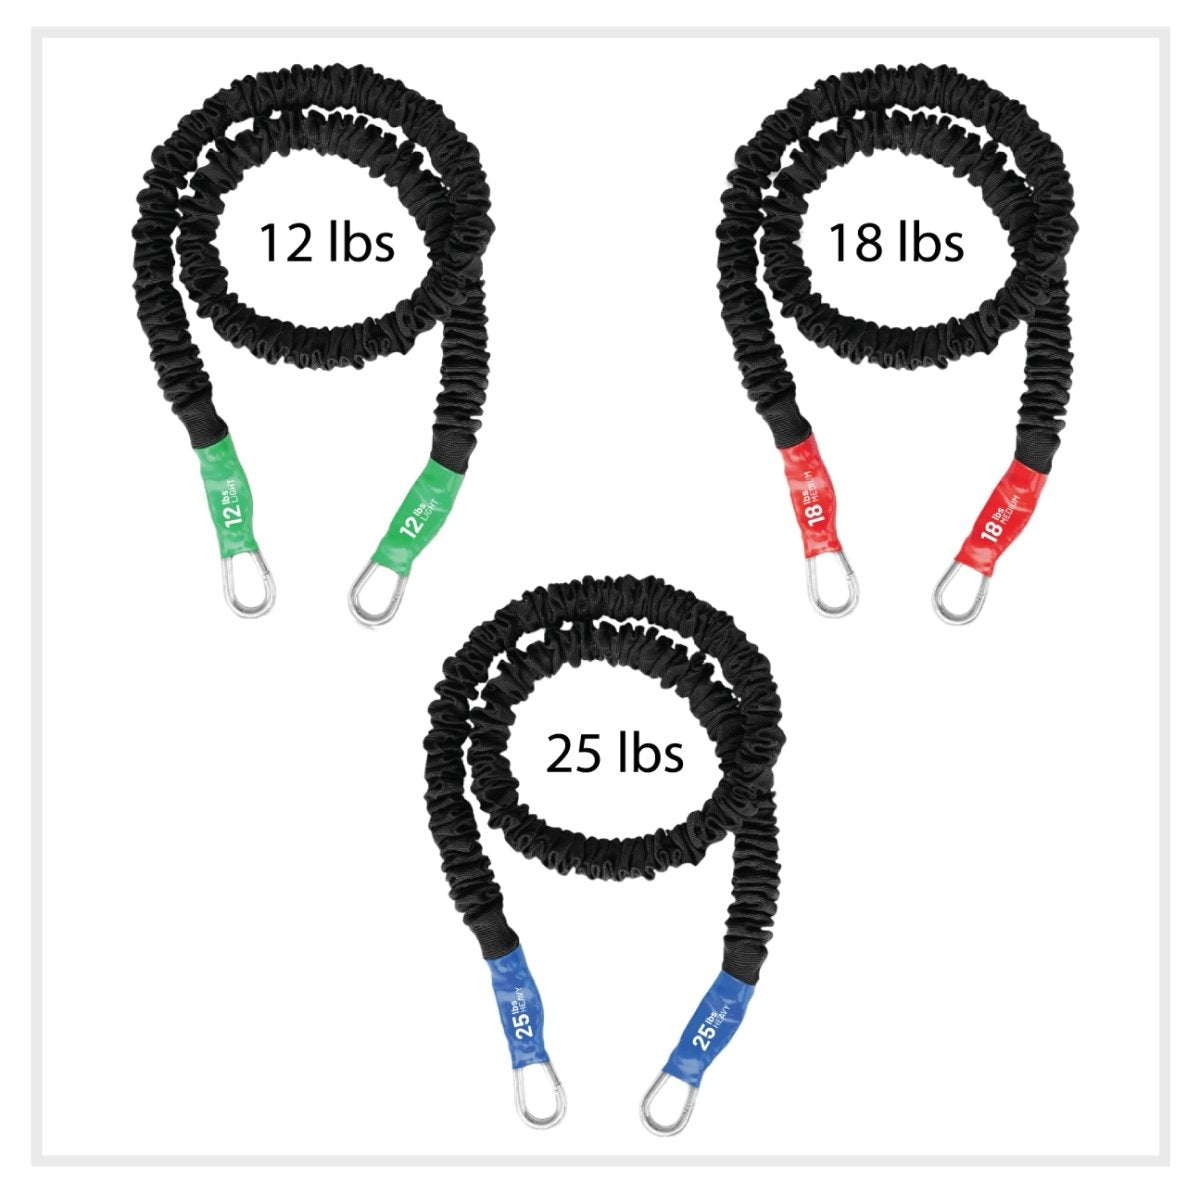 Set of 3 Covered resistance bands with clips for stacking. This bundle includes 12lb Light, 18lb Medium, and 25lb Heavy resistance bands that work well together for a resistance level of 55lbs or individually with cuffs, straps and workout bars. Made in American and covered for safety from snapping injury.